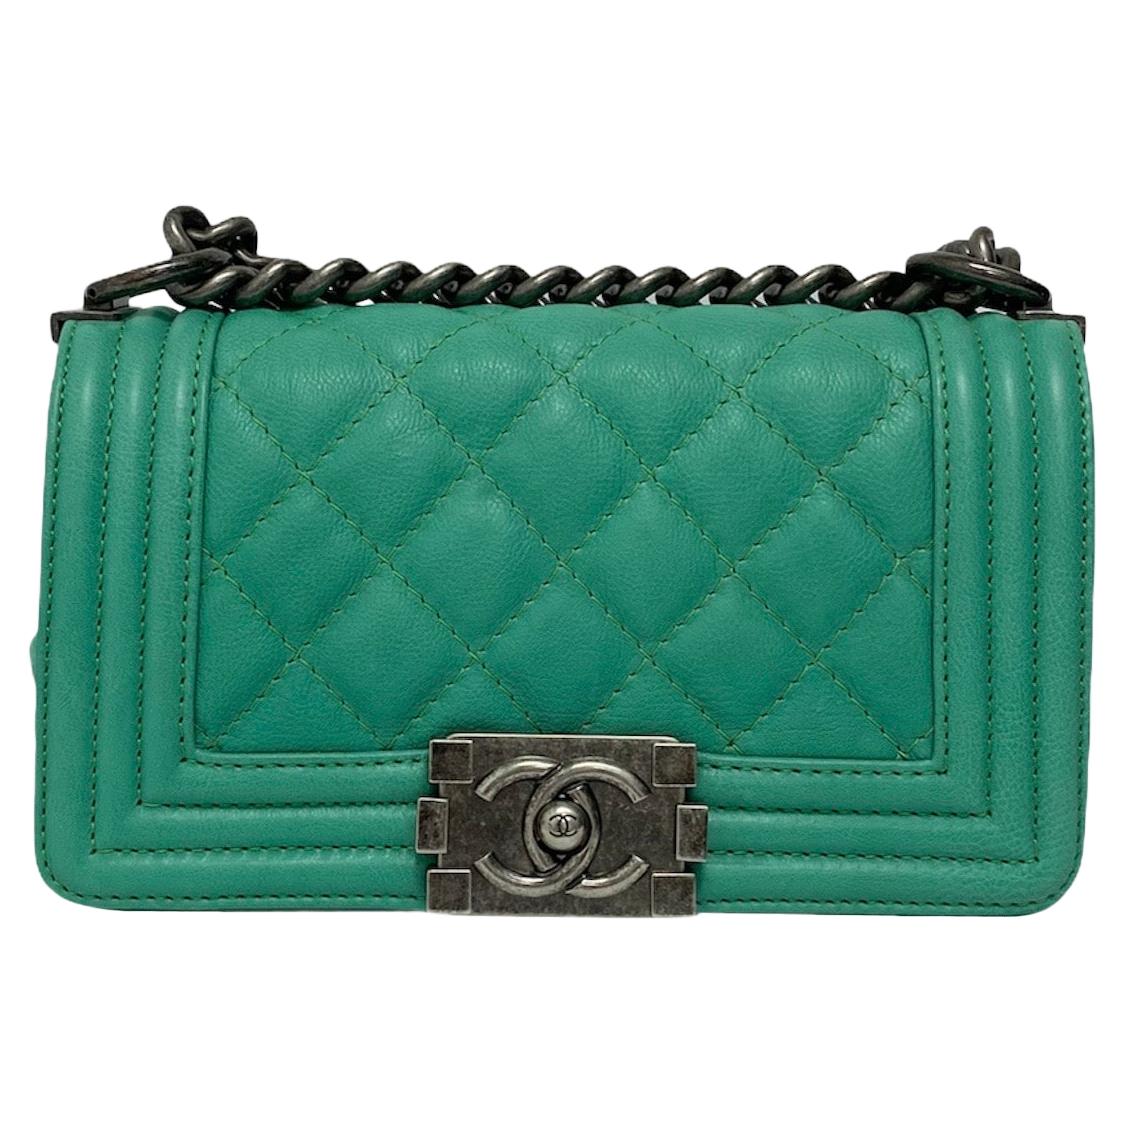 Boy leather clutch bag Chanel Green in Leather - 30548221